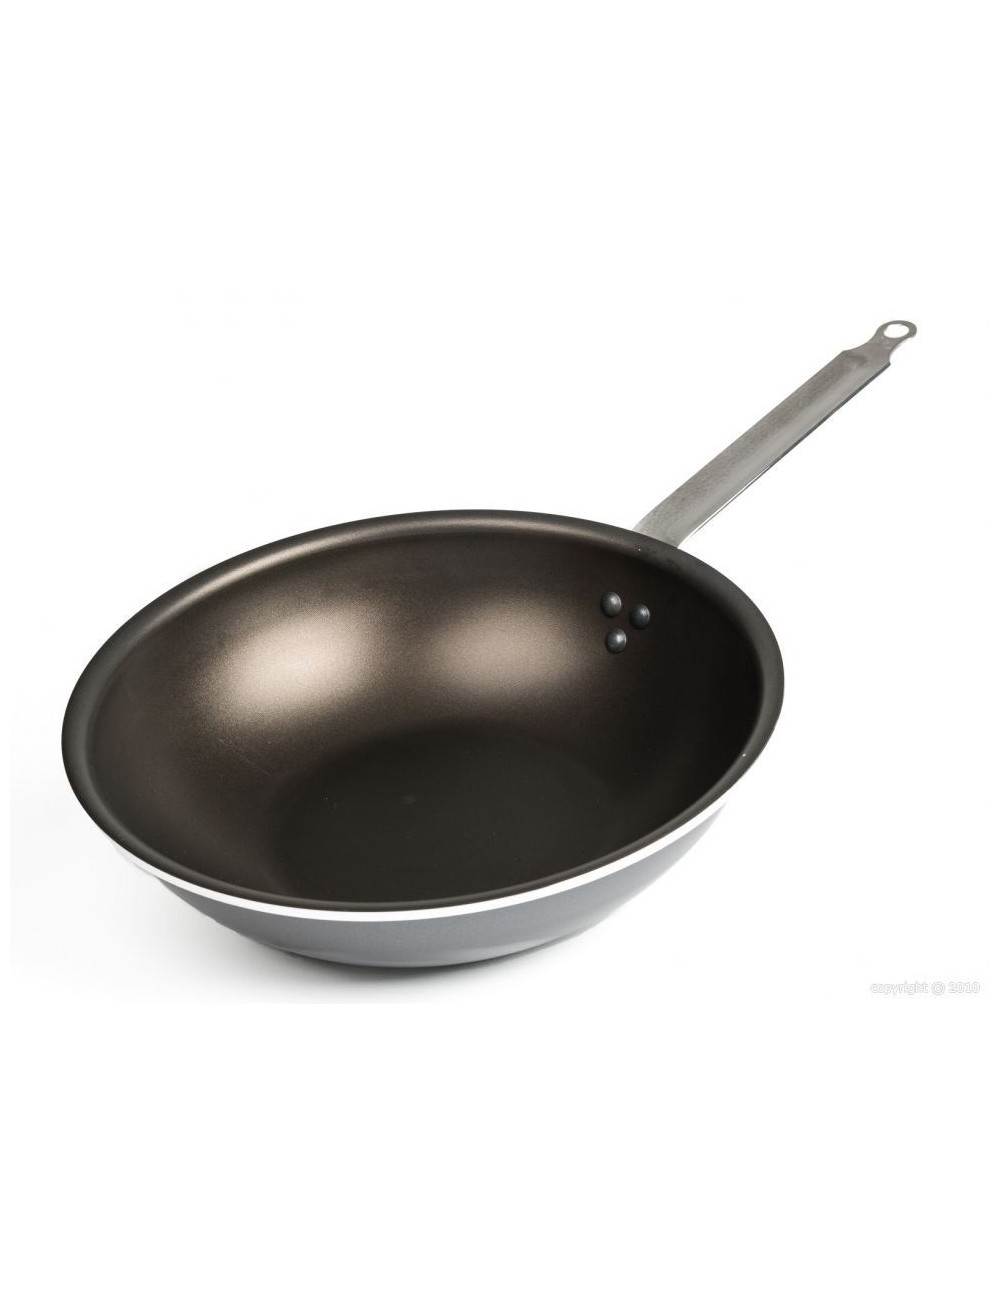 aluminum cookware - Can I use a metal spoon on aluminium pans